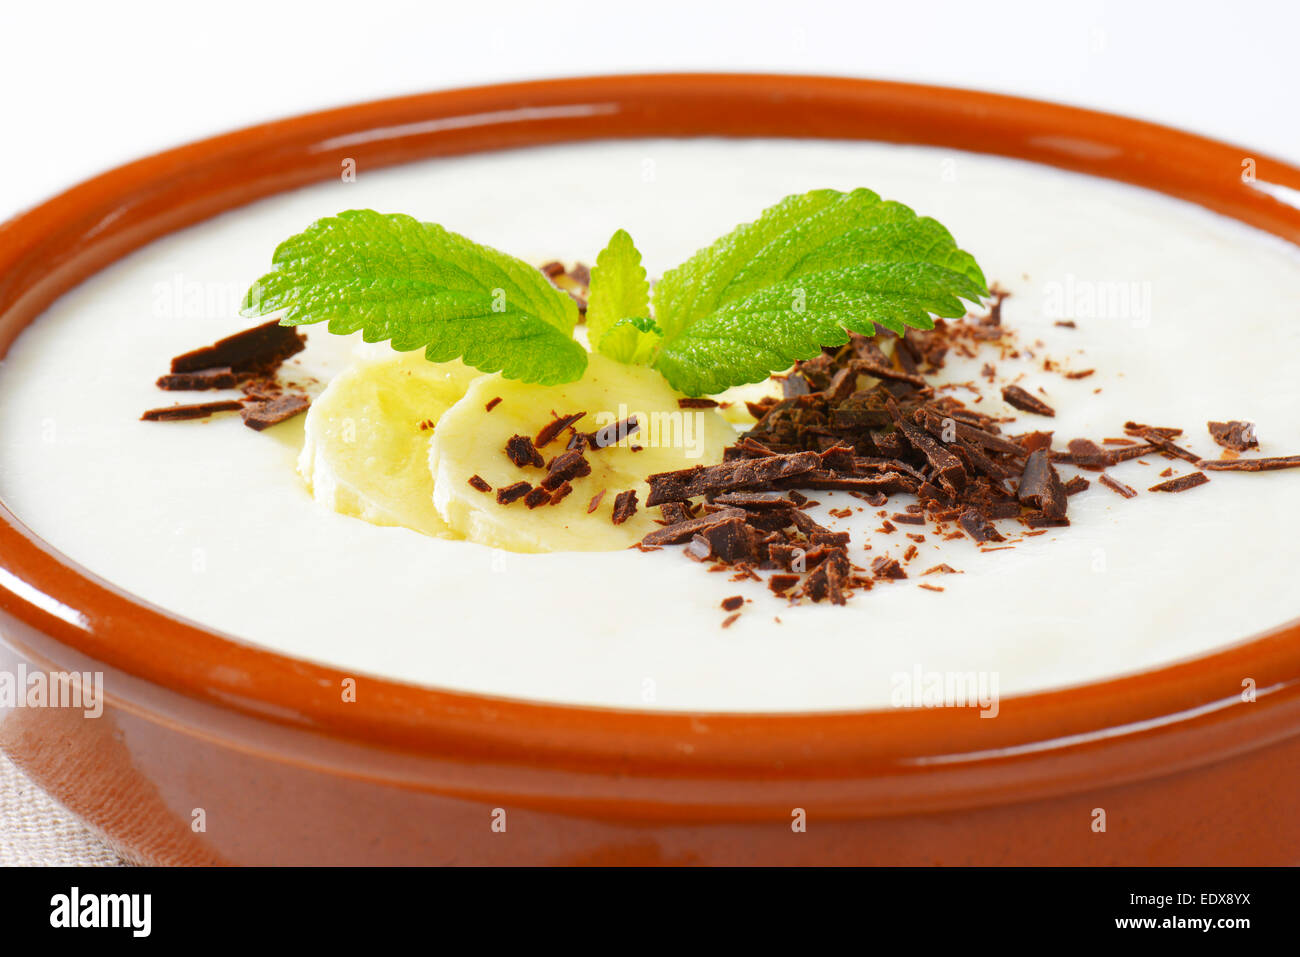 Bowl of smooth milk pudding with sliced banana and grated chocolate Stock Photo